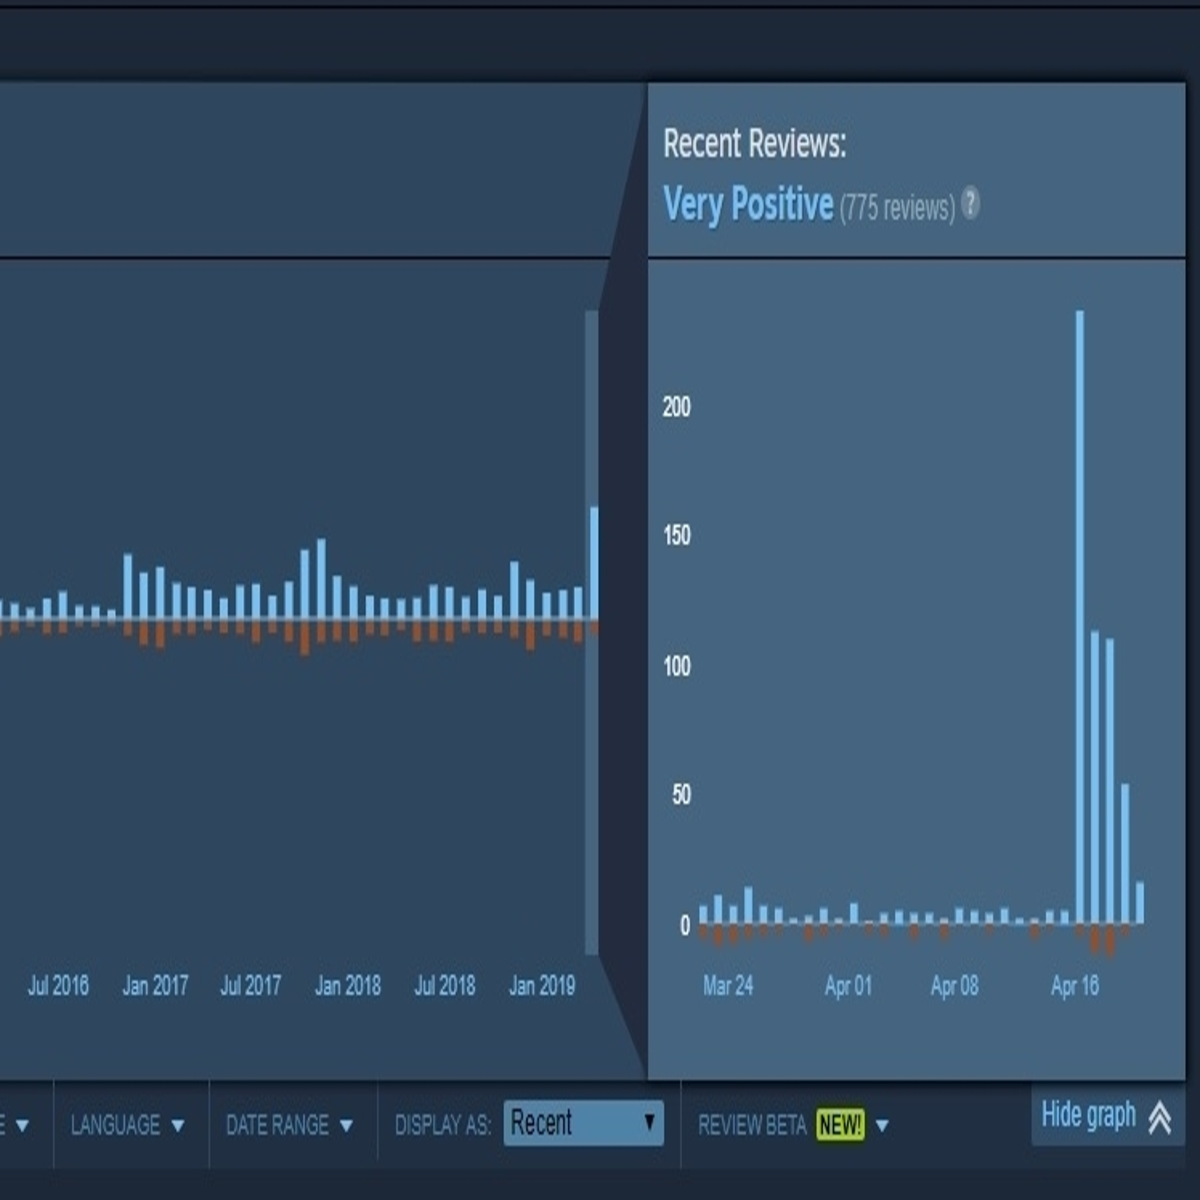 Assassin's Creed Unity Is Getting Positive Review-Bombed On Steam Following  Giveaway